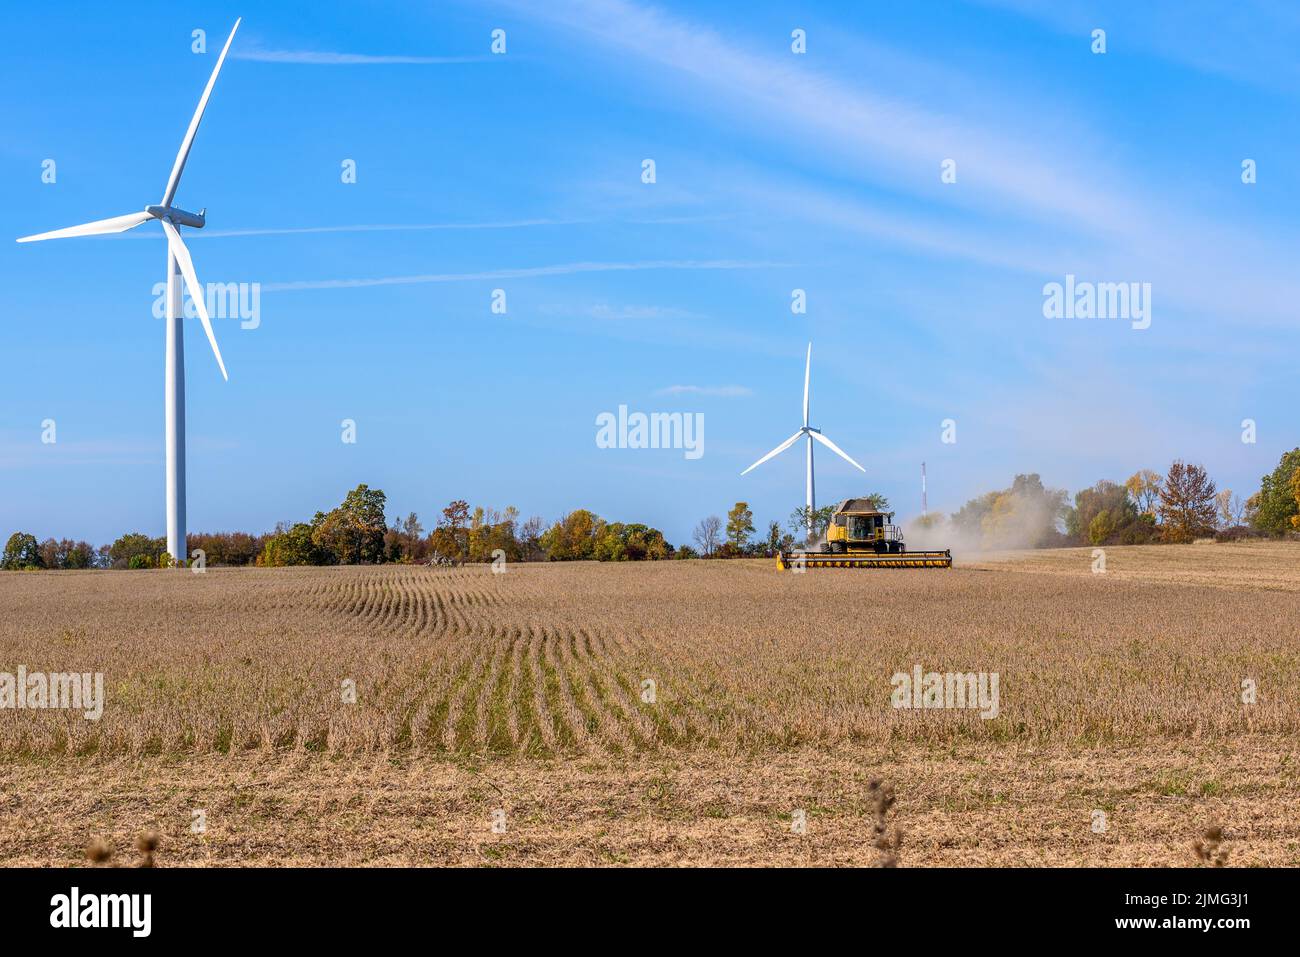 Combine harvester in a wheat field overlooked by tall wind turbines on a clear autumn day Stock Photo